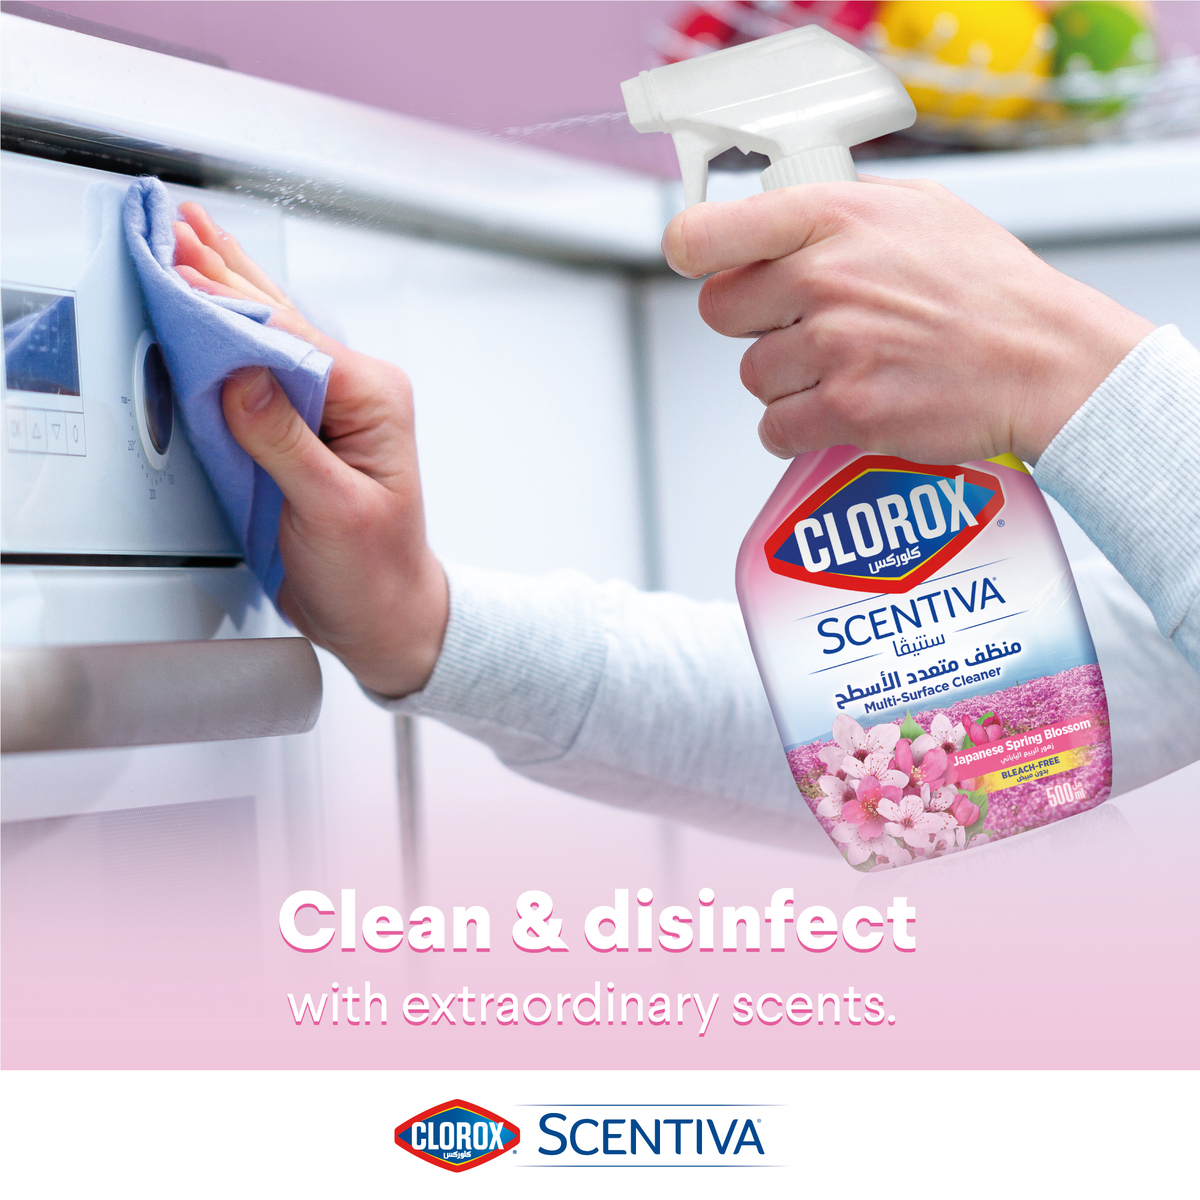 Clorox Multi-Surface Cleaner Scentiva With Japanese Spring Blossom Scent 500 ml